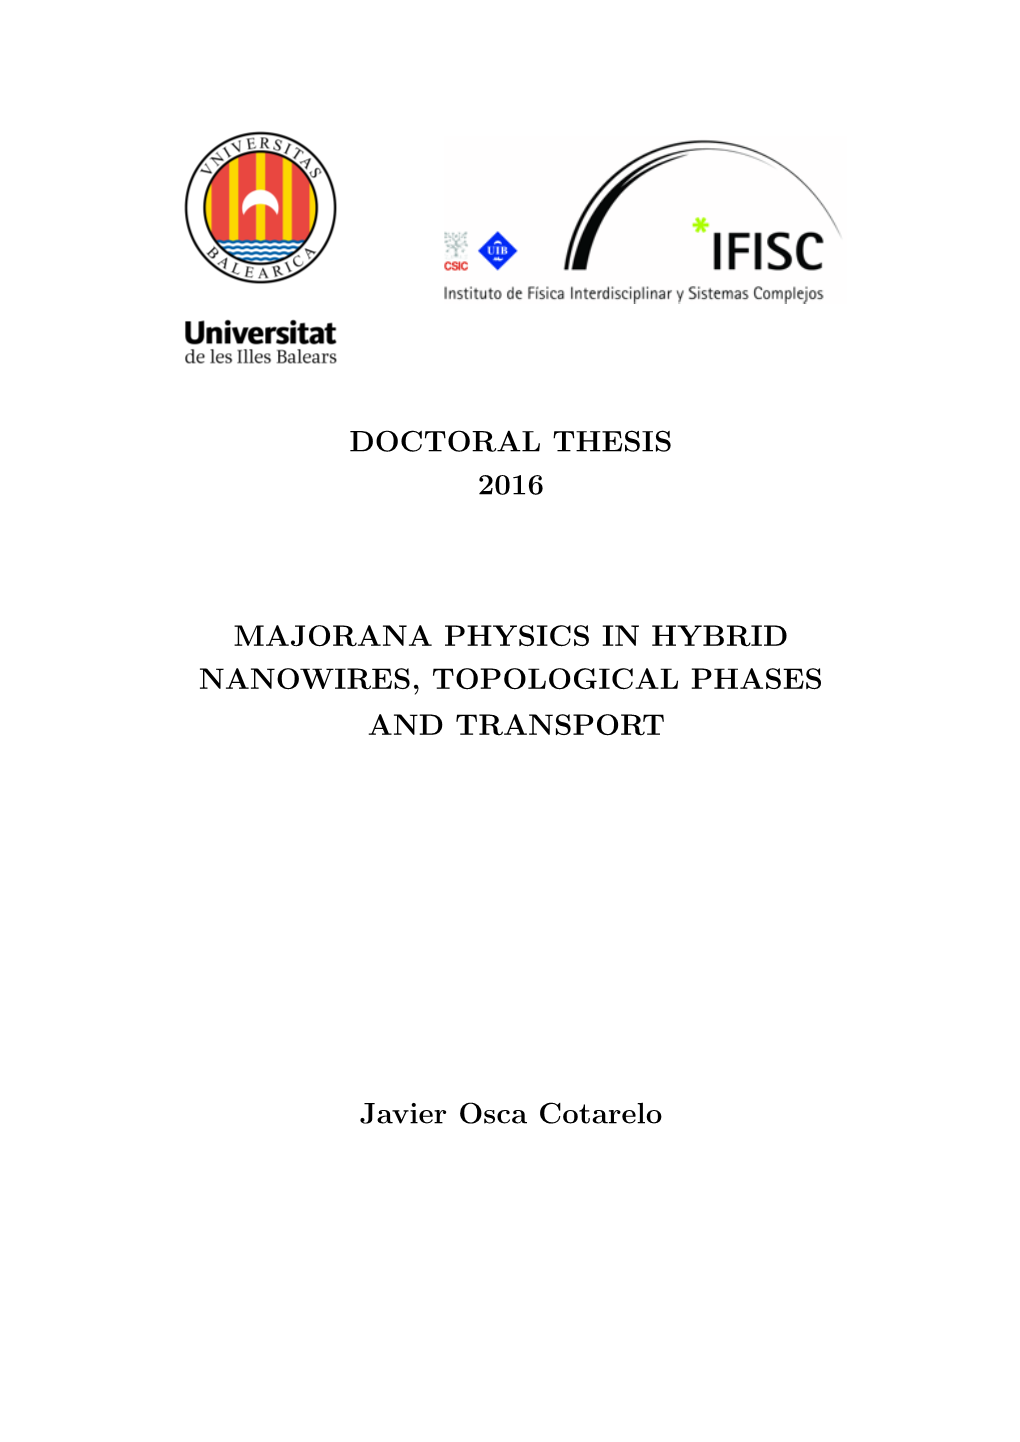 Doctoral Thesis 2016 Majorana Physics in Hybrid